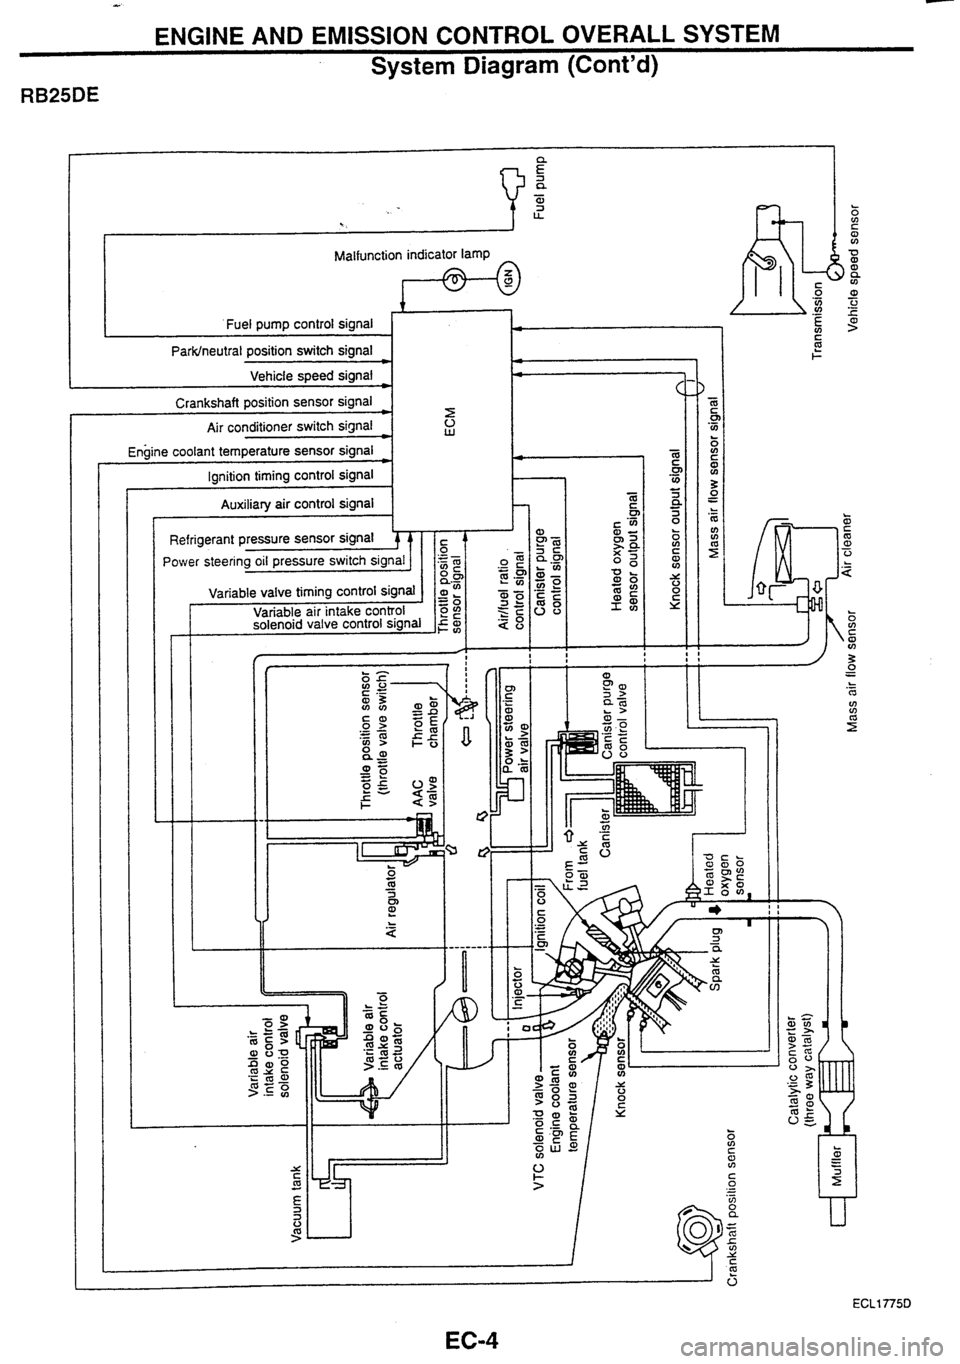 NISSAN GT-R 1998  Service Manual 
ENGINE AND EMISSION  CONTROL OVERALL  SYSTEM 
System 
Diagram (Contd) 
a 
E a - al 1 U. 
Malfunction indicator  lamp 
Fuel pump  control signal 
+ 
ParWneutral  position switch signal 2 - 1 F 
Vehic